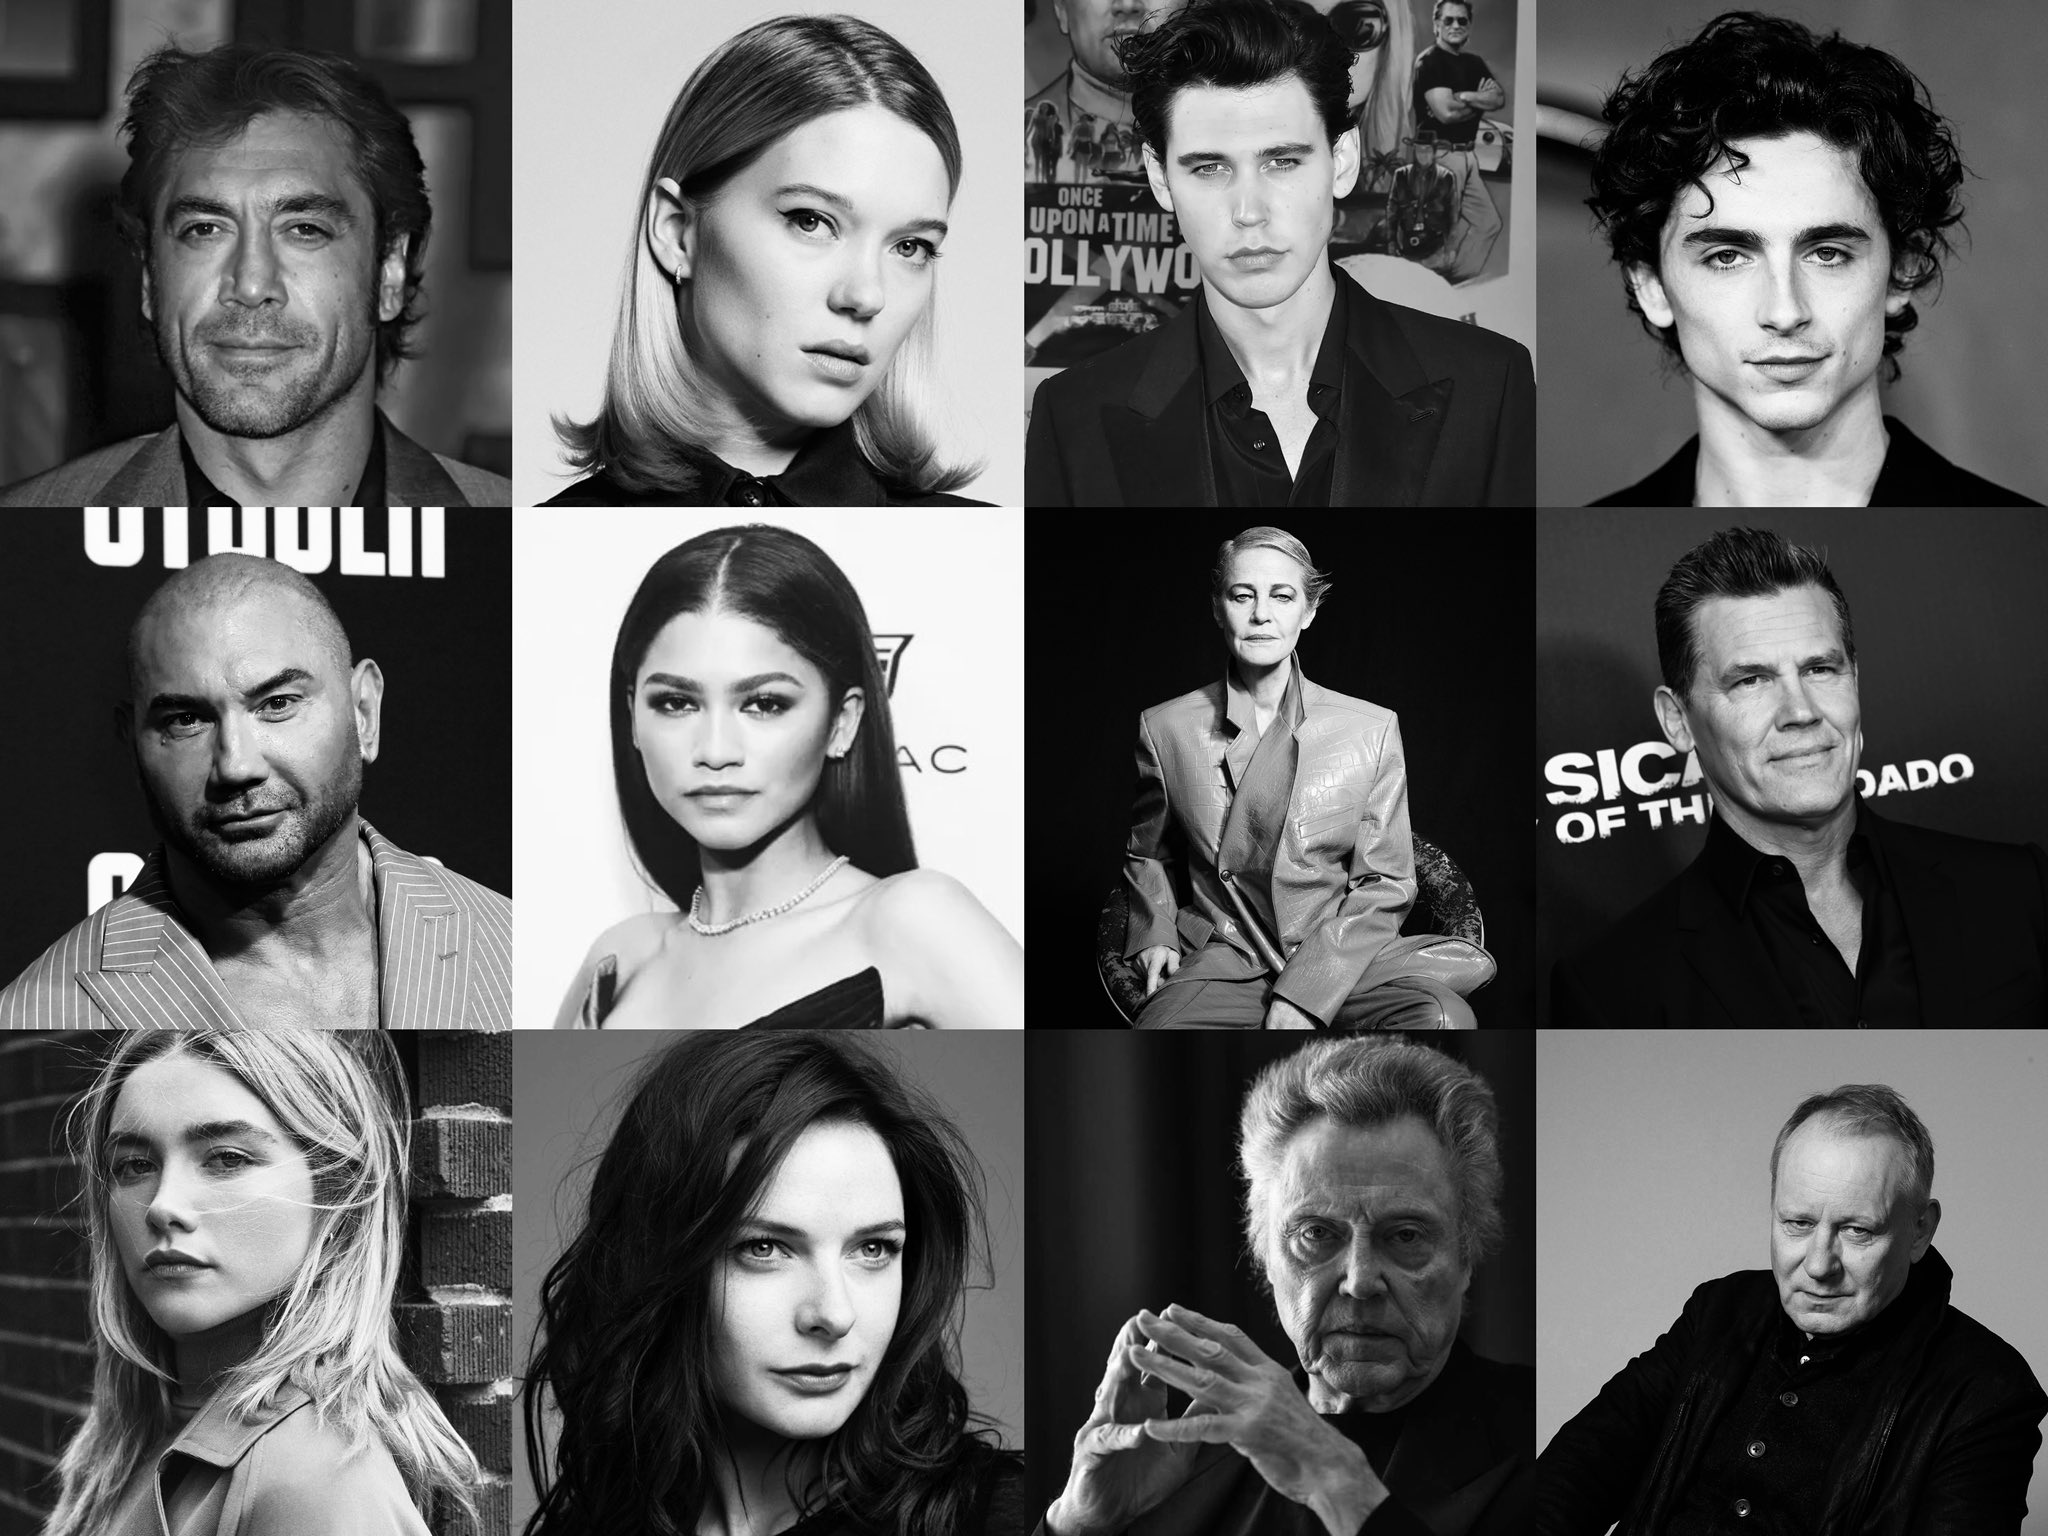 Dune: Part 2 Countdown on Twitter: "486 days left #Dune #DunePartTwo Your  official (and assumed) Dune: Part 2 cast so far https://t.co/5LsyAQIe6d" /  Twitter